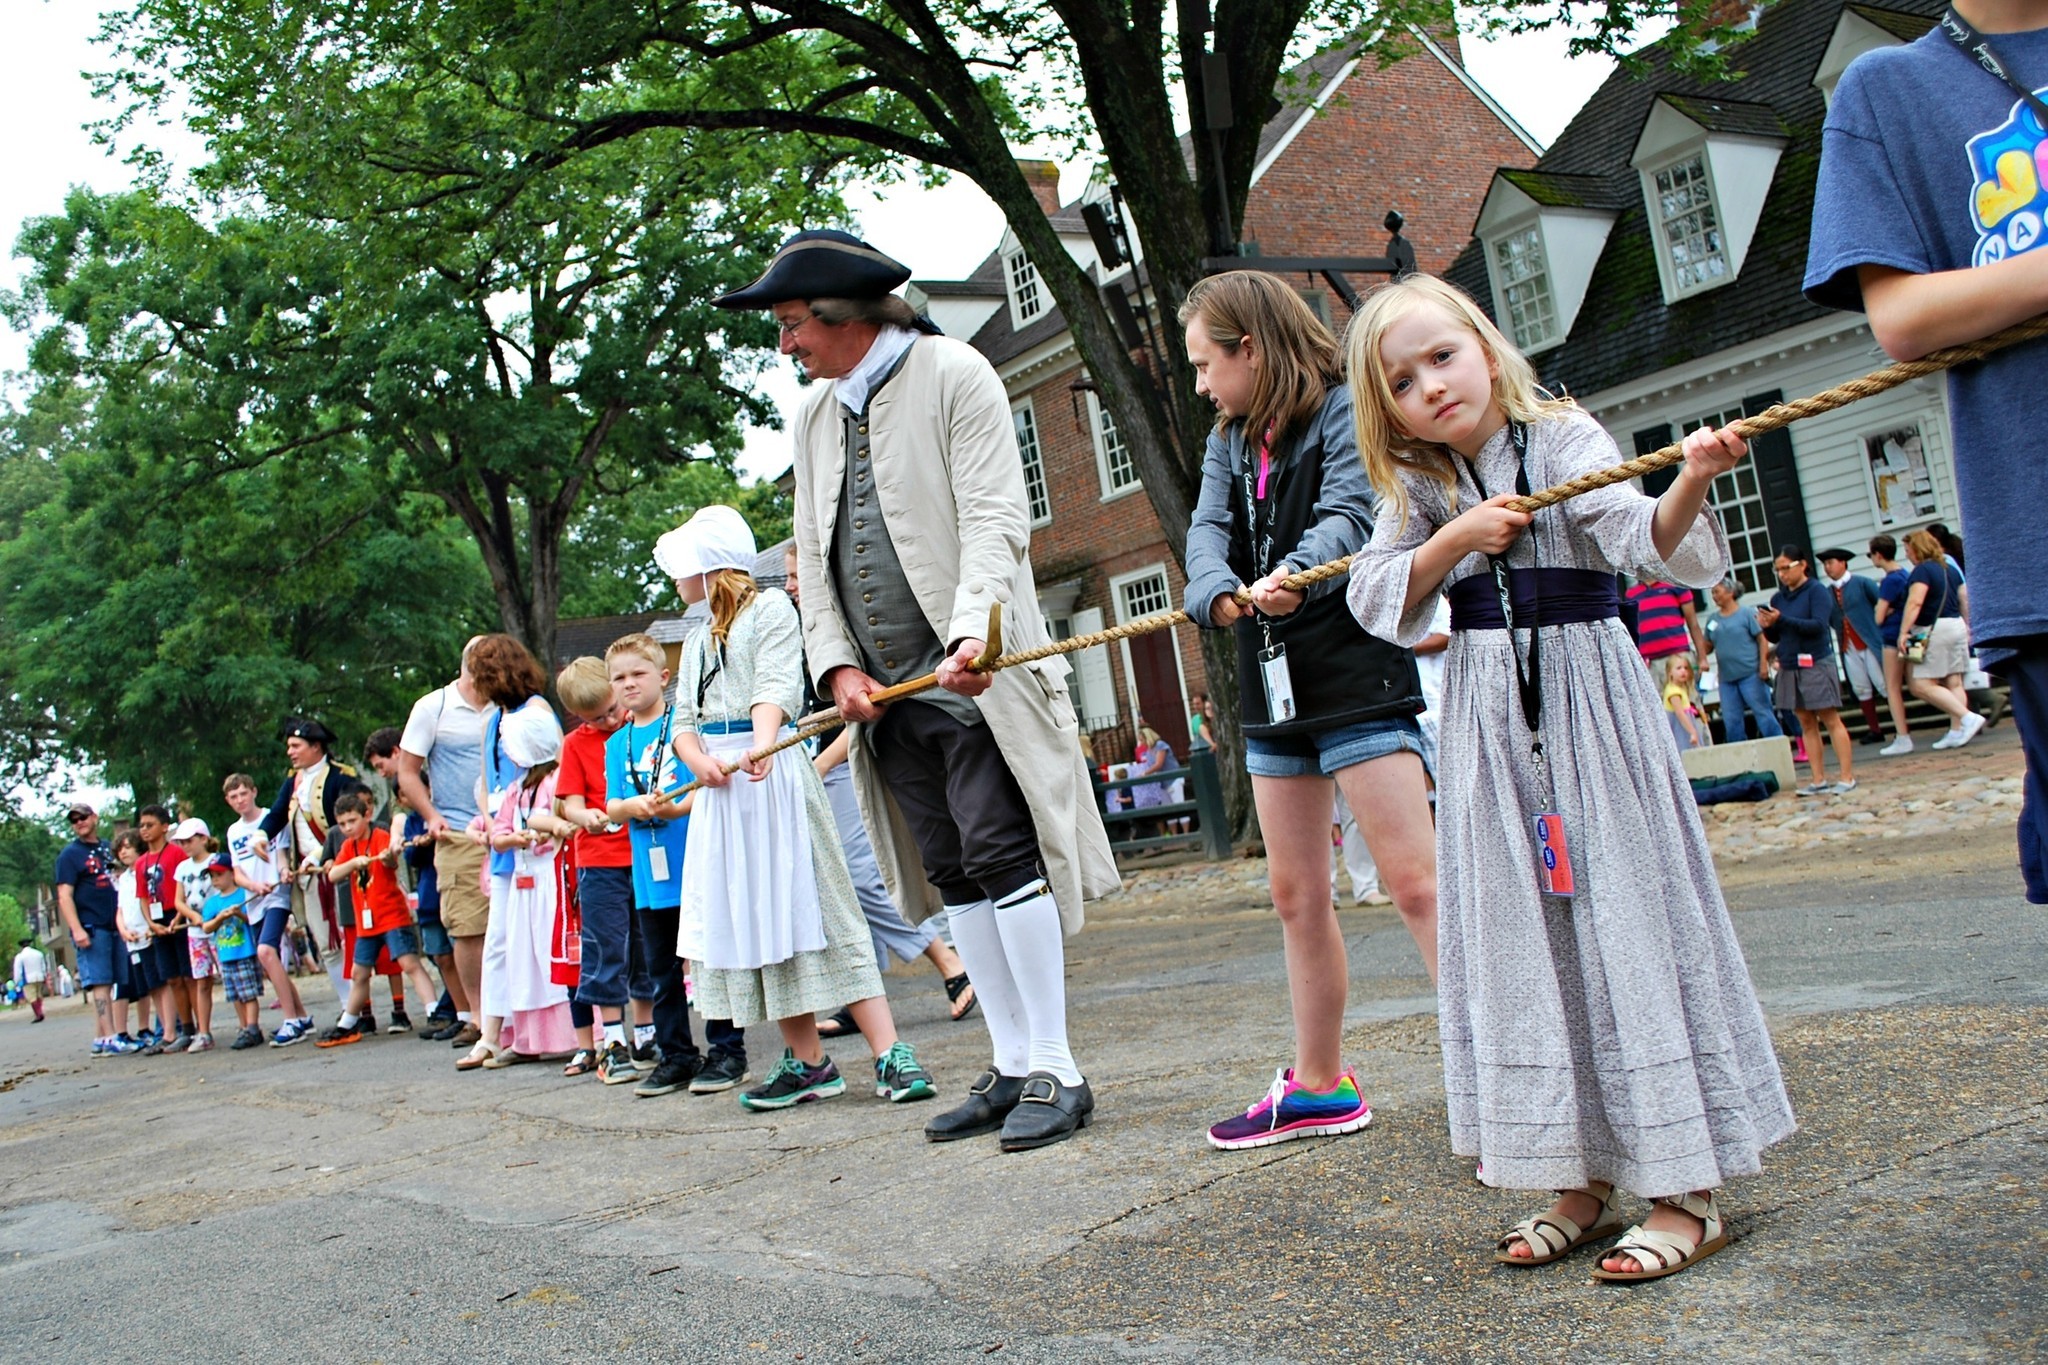 PICTURES: Fourth of July at Colonial Williamsburg - The Virginia Gazette